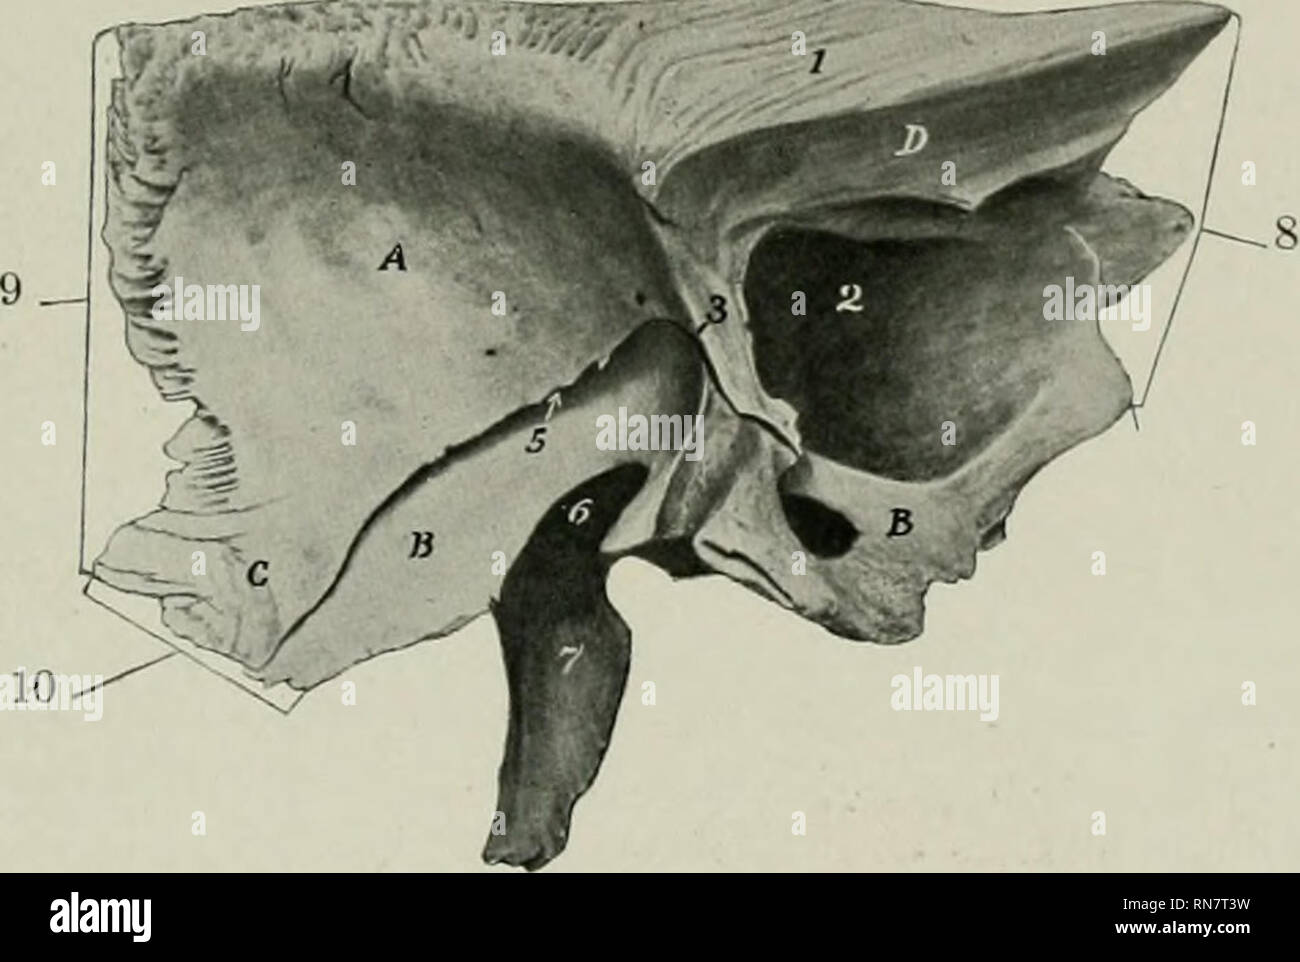 . The anatomy of the domestic animals. Veterinary anatomy. THE FRONTAL BONES 59 parietal suture is usually closed at four years, the parieto-occipital at five j^ears, and the squamous at twelve to fifteen j'ears. The Frontal Bones The frontal bones (Ossa frontalia) are situated on the limits of the cranium and face, between the parietals behind and the nasal bones in front. Each is irregularly quadrilateral, and consists of naso-frontal, orbital, and temporal parts. The naso-frontal part (Pars naso-frontalis) forms the basis of the forehead. Its external or frontal surface (Fades frontalis) is Stock Photo